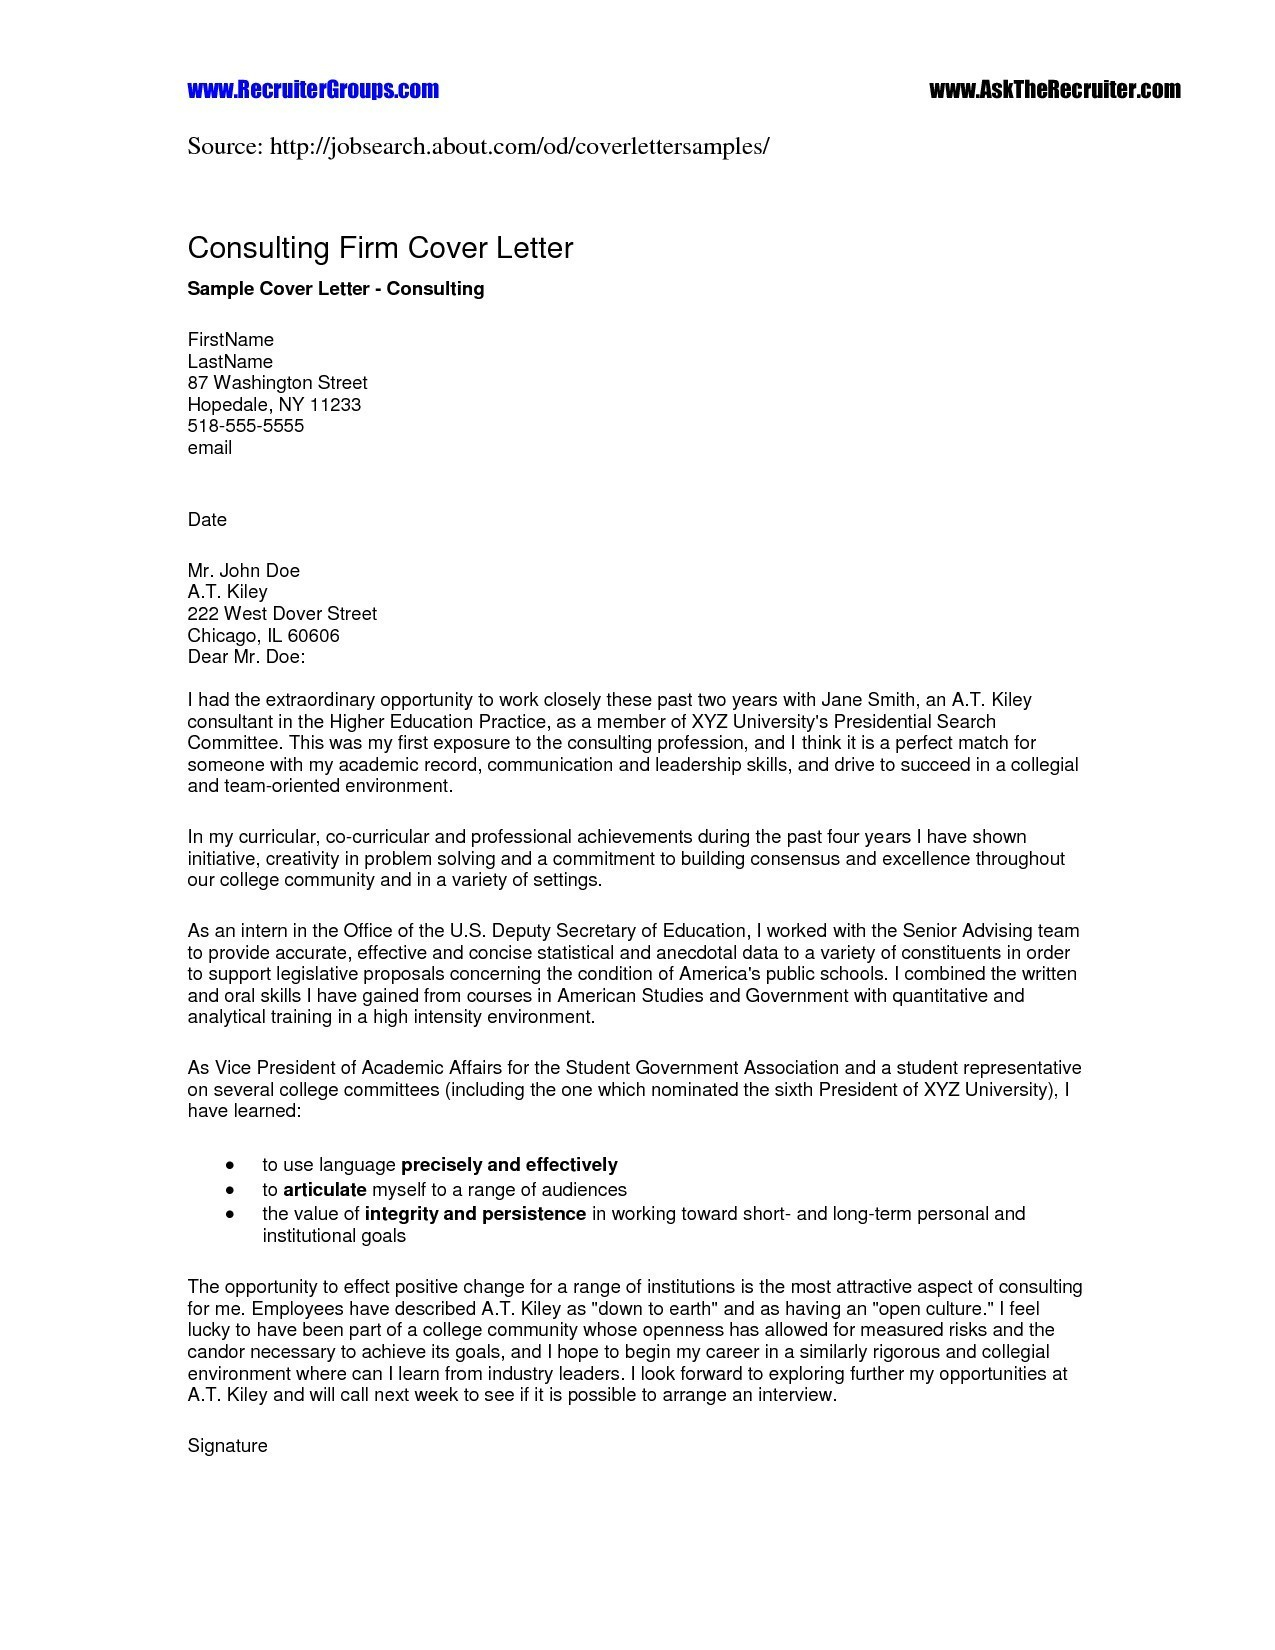 Formal Cover Letter Template - Business Cover Letter format Sample Fresh format Business Cover